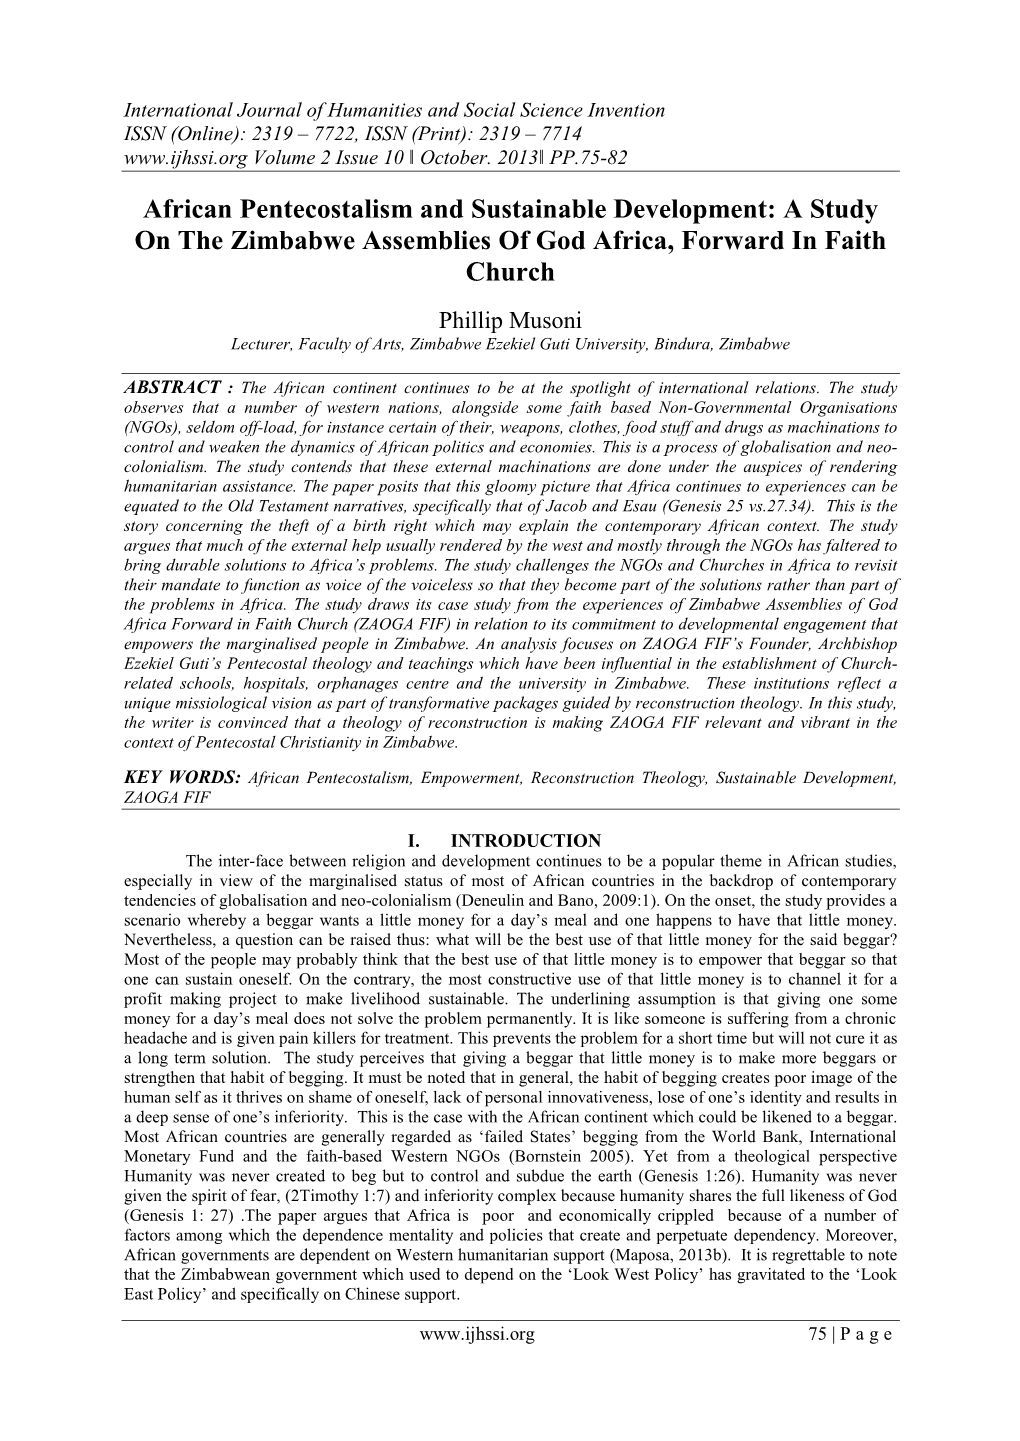 African Pentecostalism and Sustainable Development: a Study on the Zimbabwe Assemblies of God Africa, Forward in Faith Church